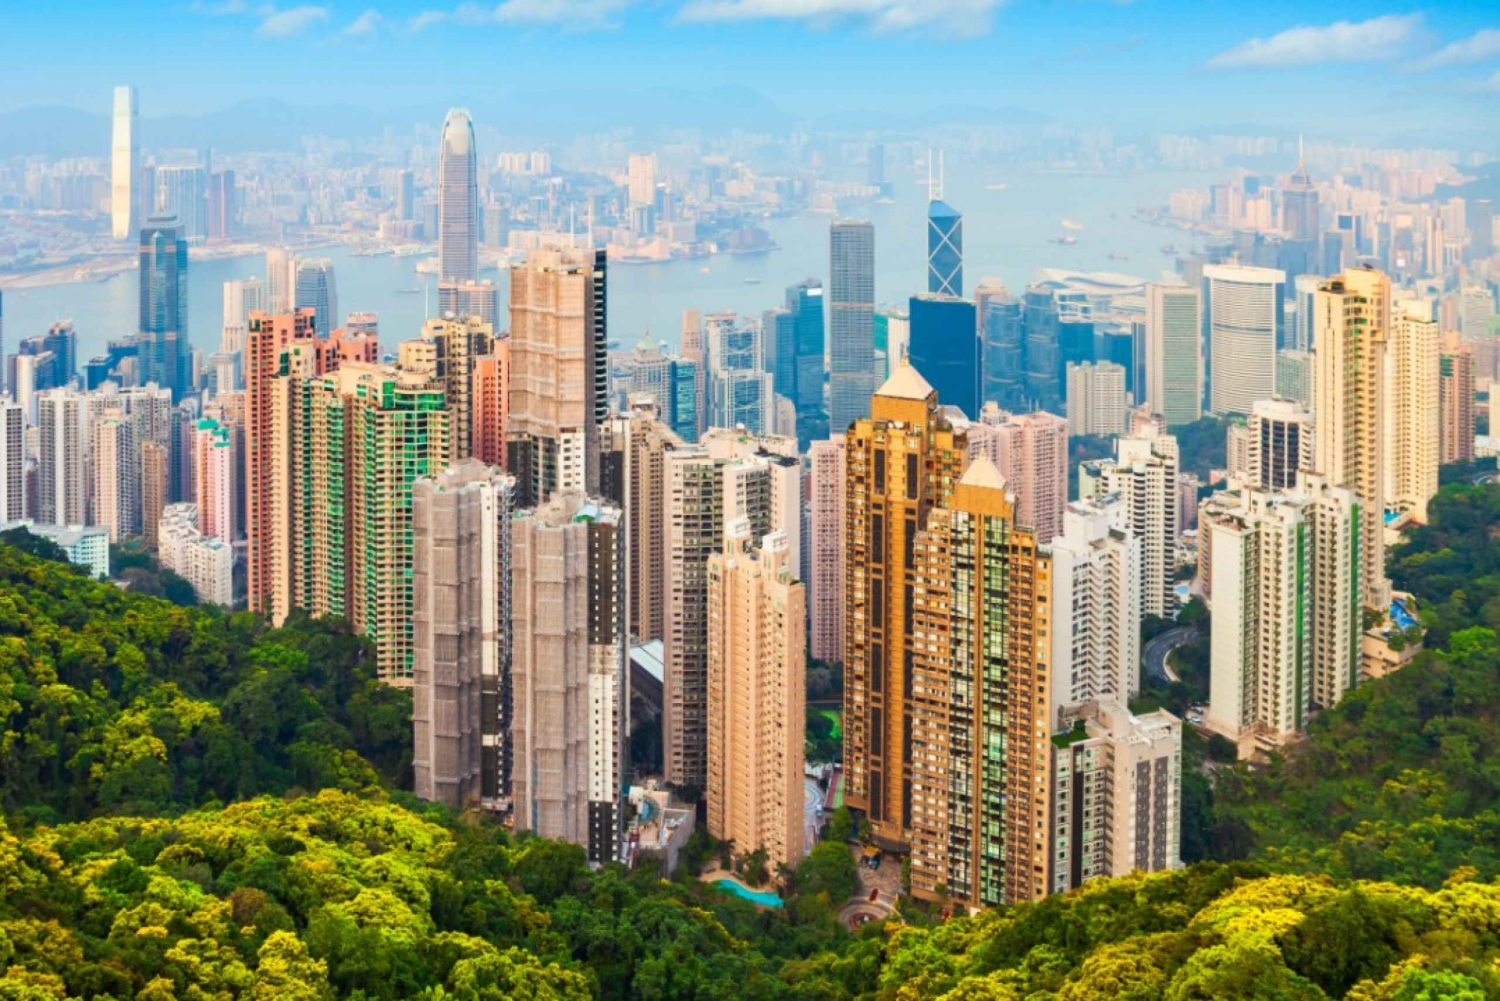 Hong Kong: Victoria Peak Unveiled Self-Guided Audio Tour